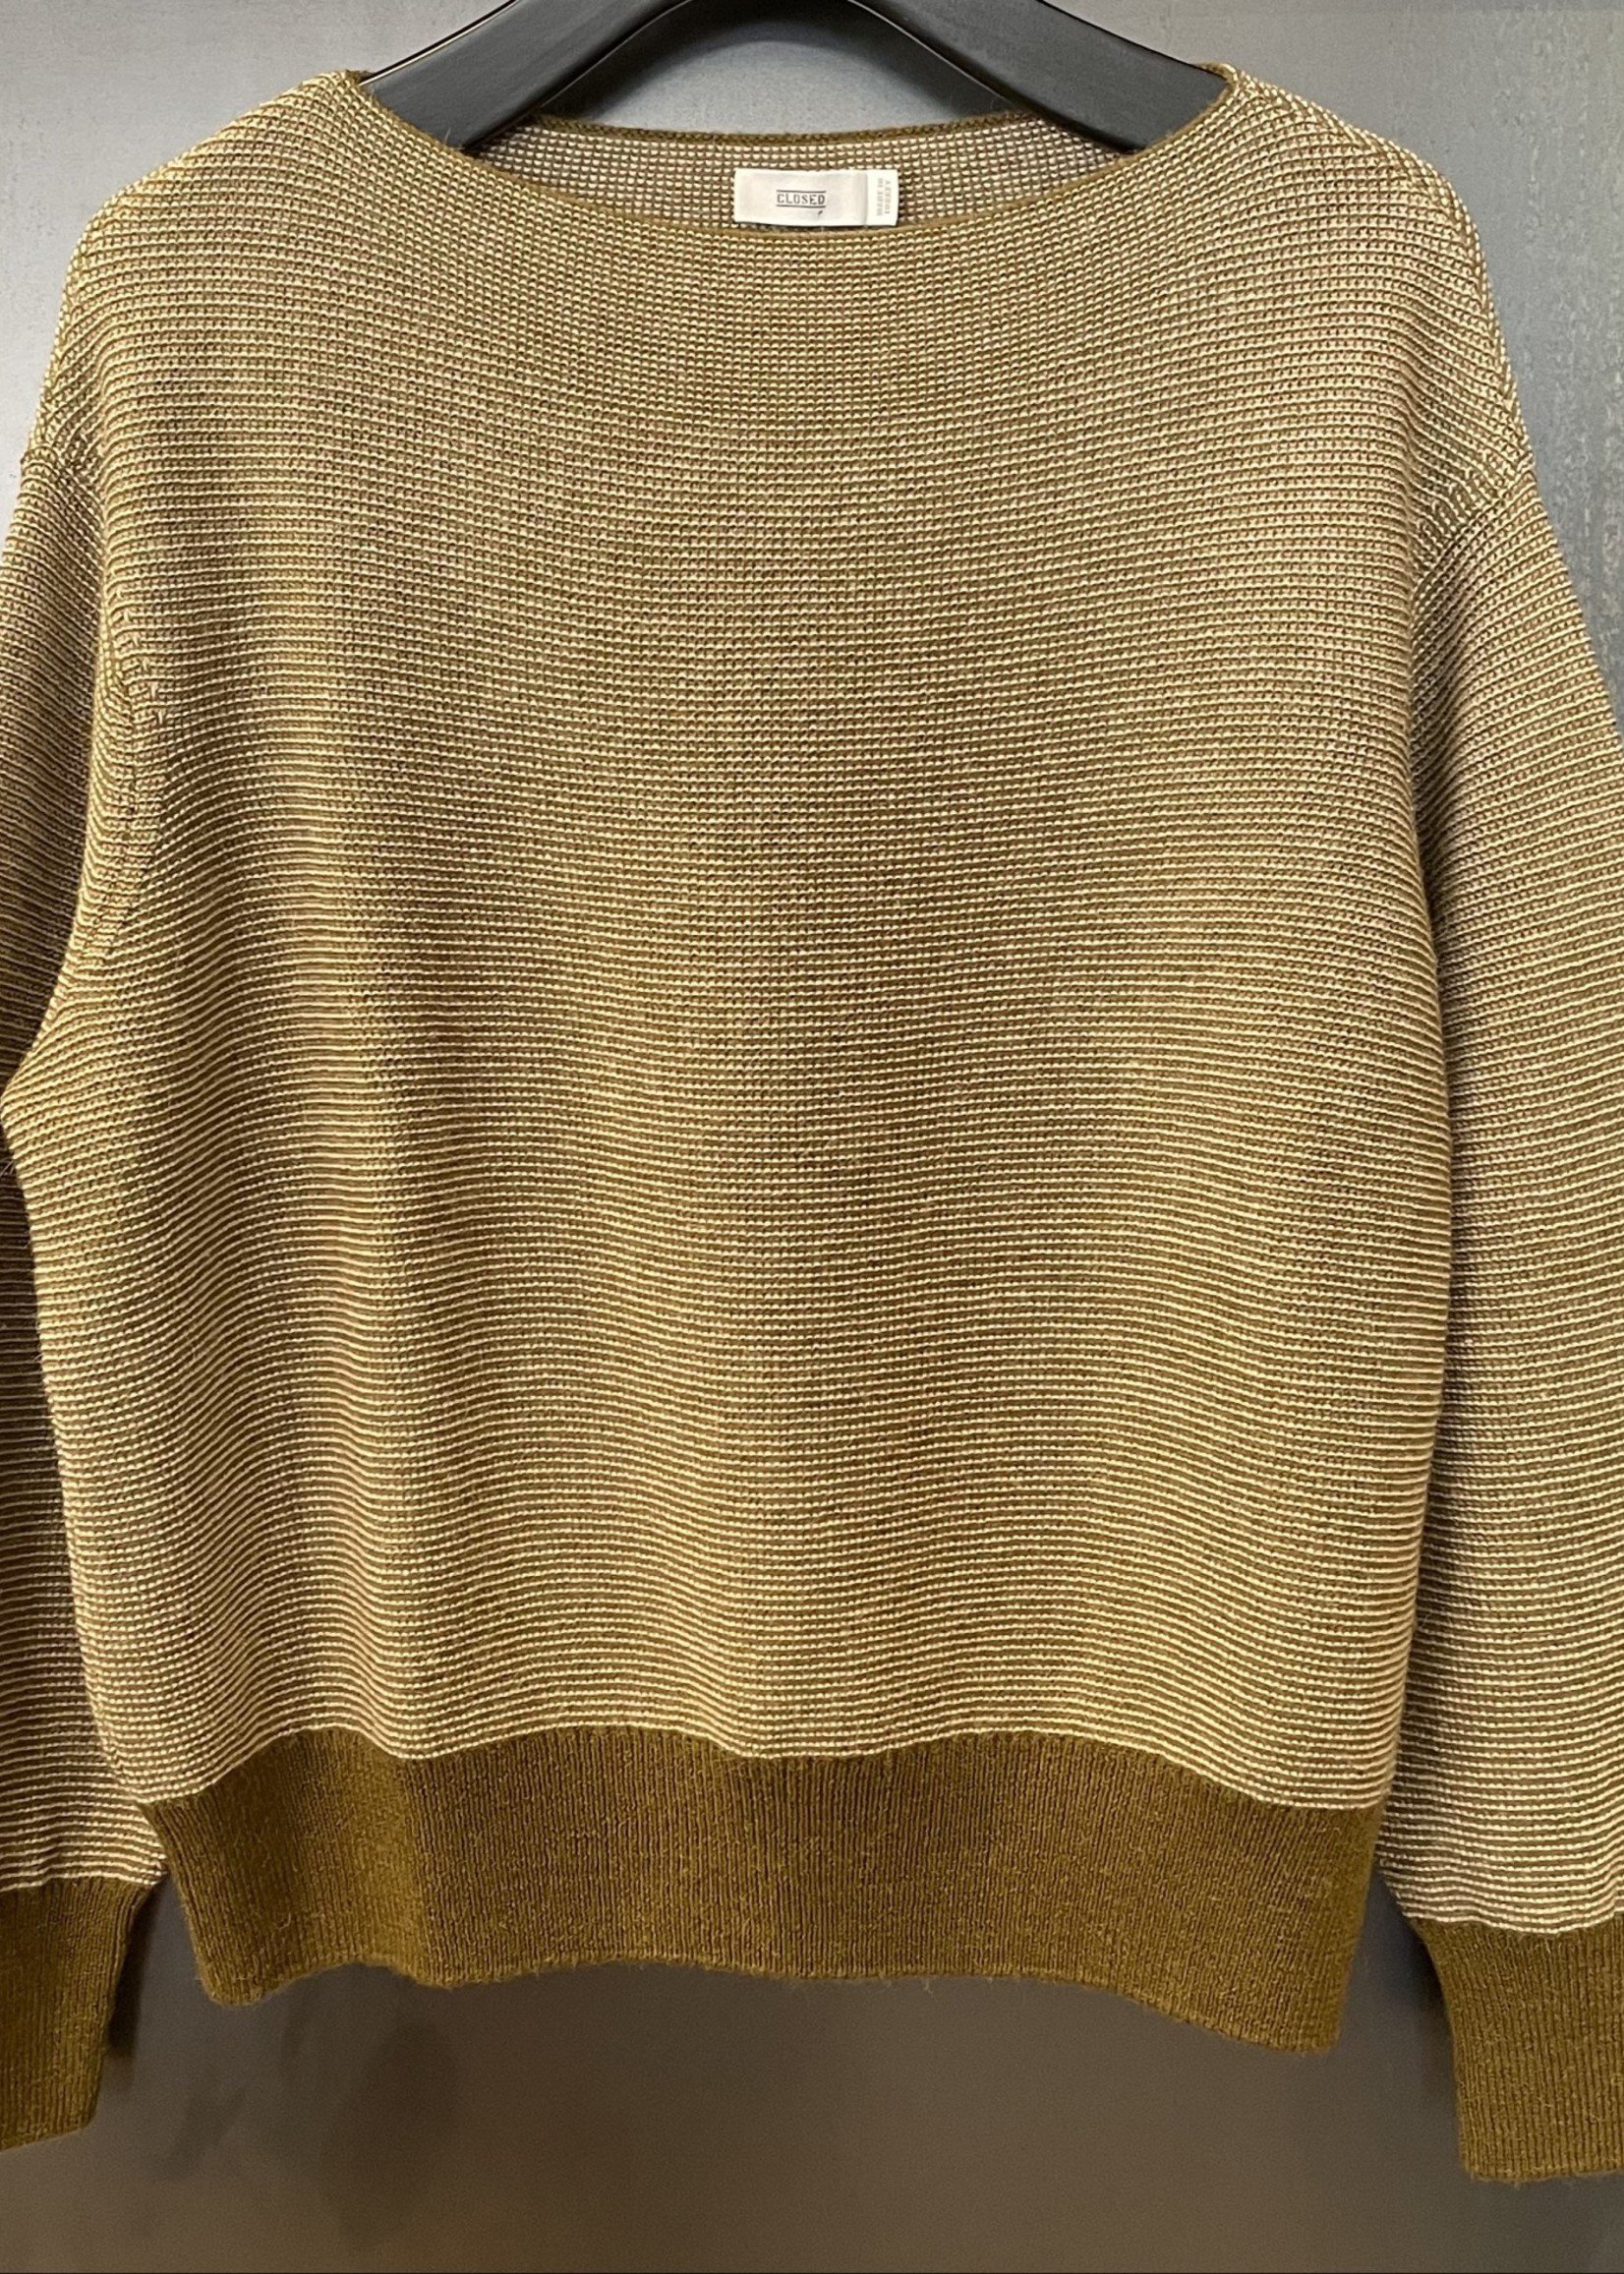 Closed Closed Knit Sweater